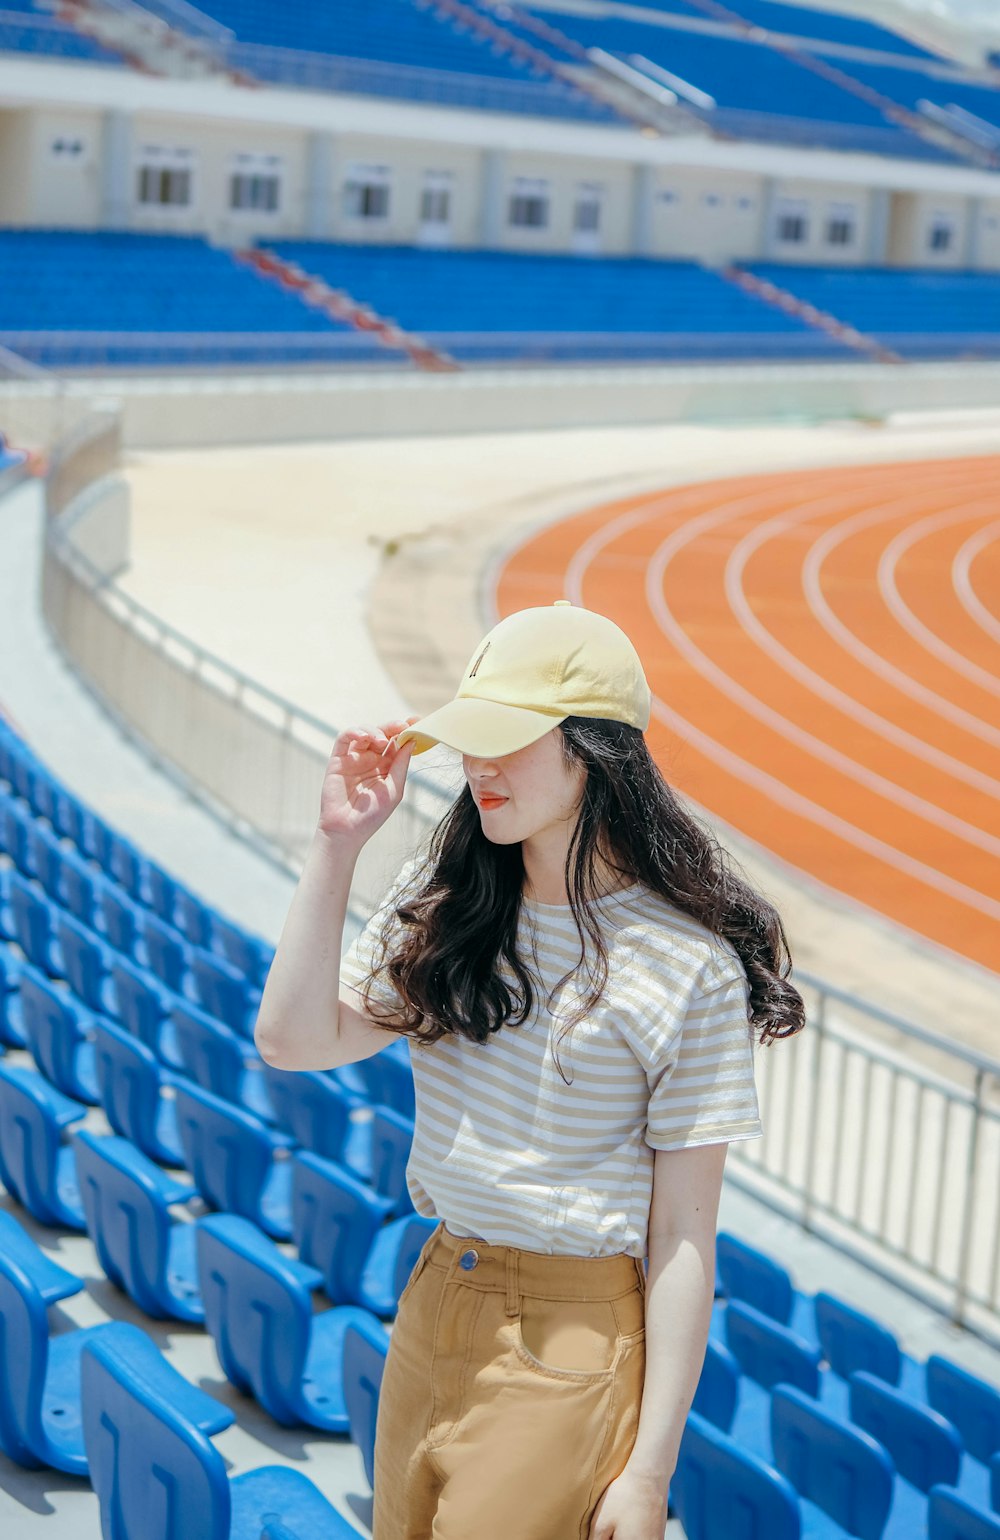 a woman standing in front of a blue stadium